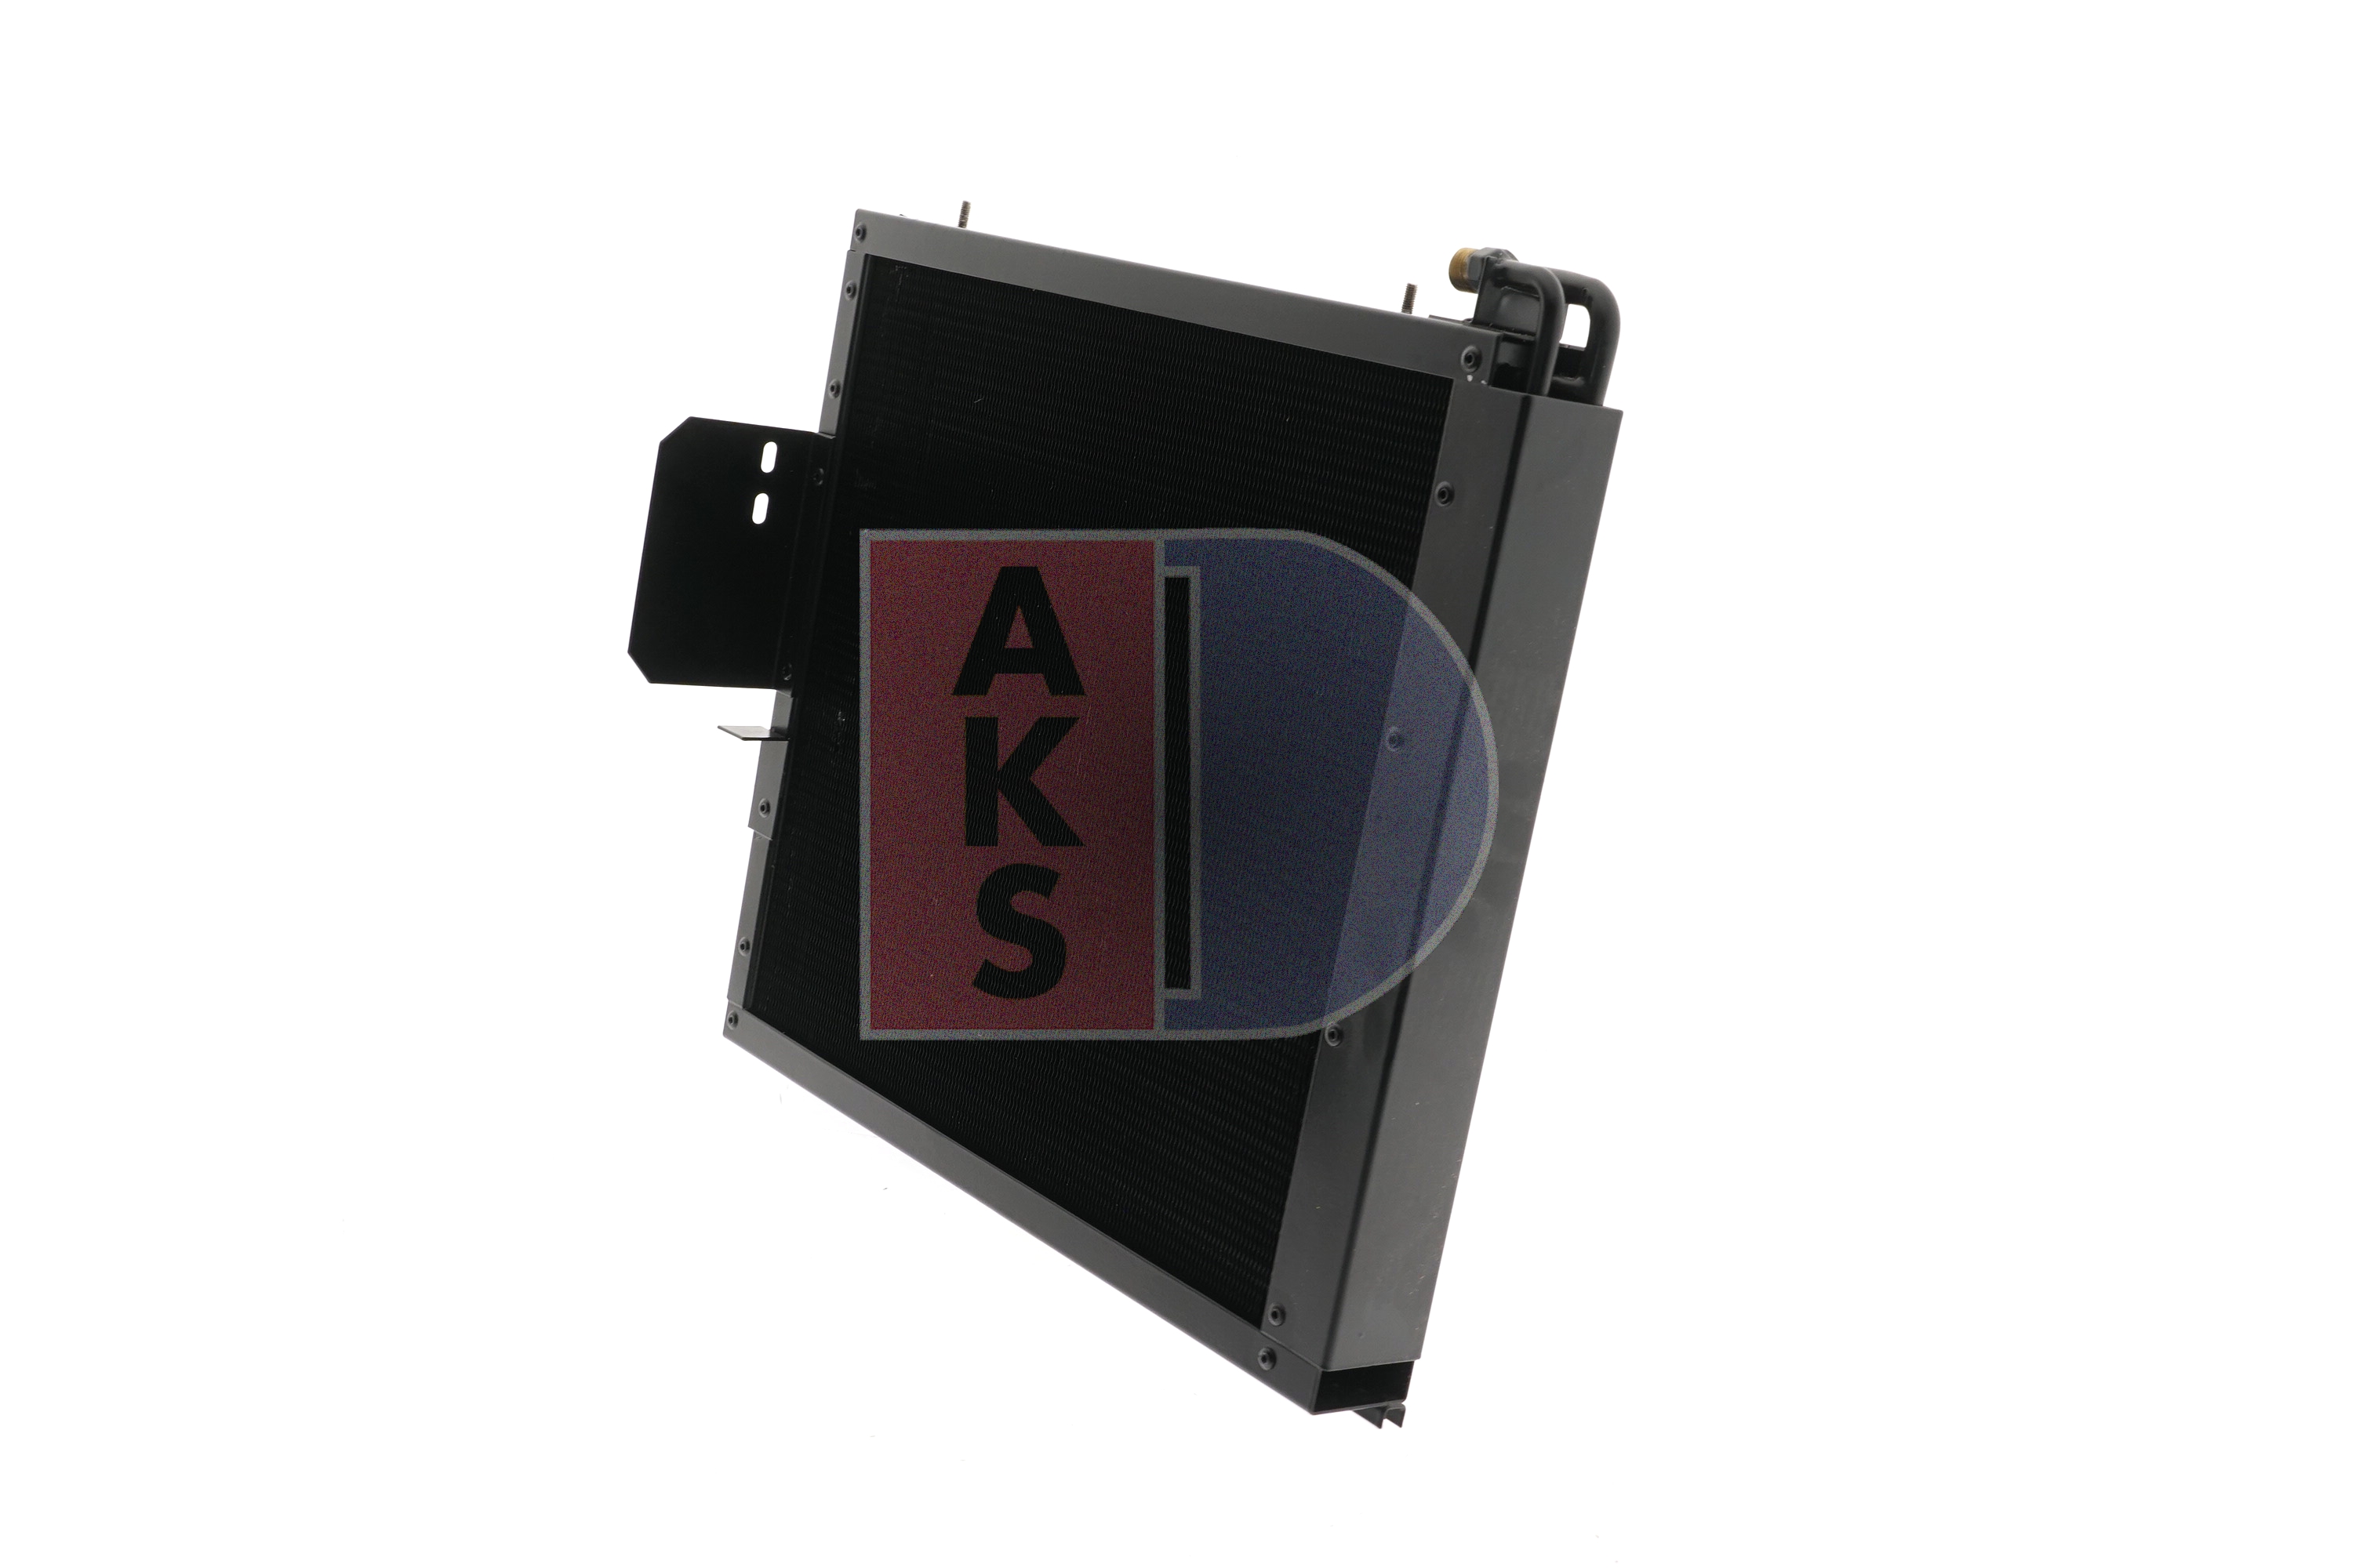 AKS DASIS 440x440x50, 18,8mm, 15,4mm, 440mm Core Dimensions: 440x440x50 Condenser, air conditioning 422088N buy